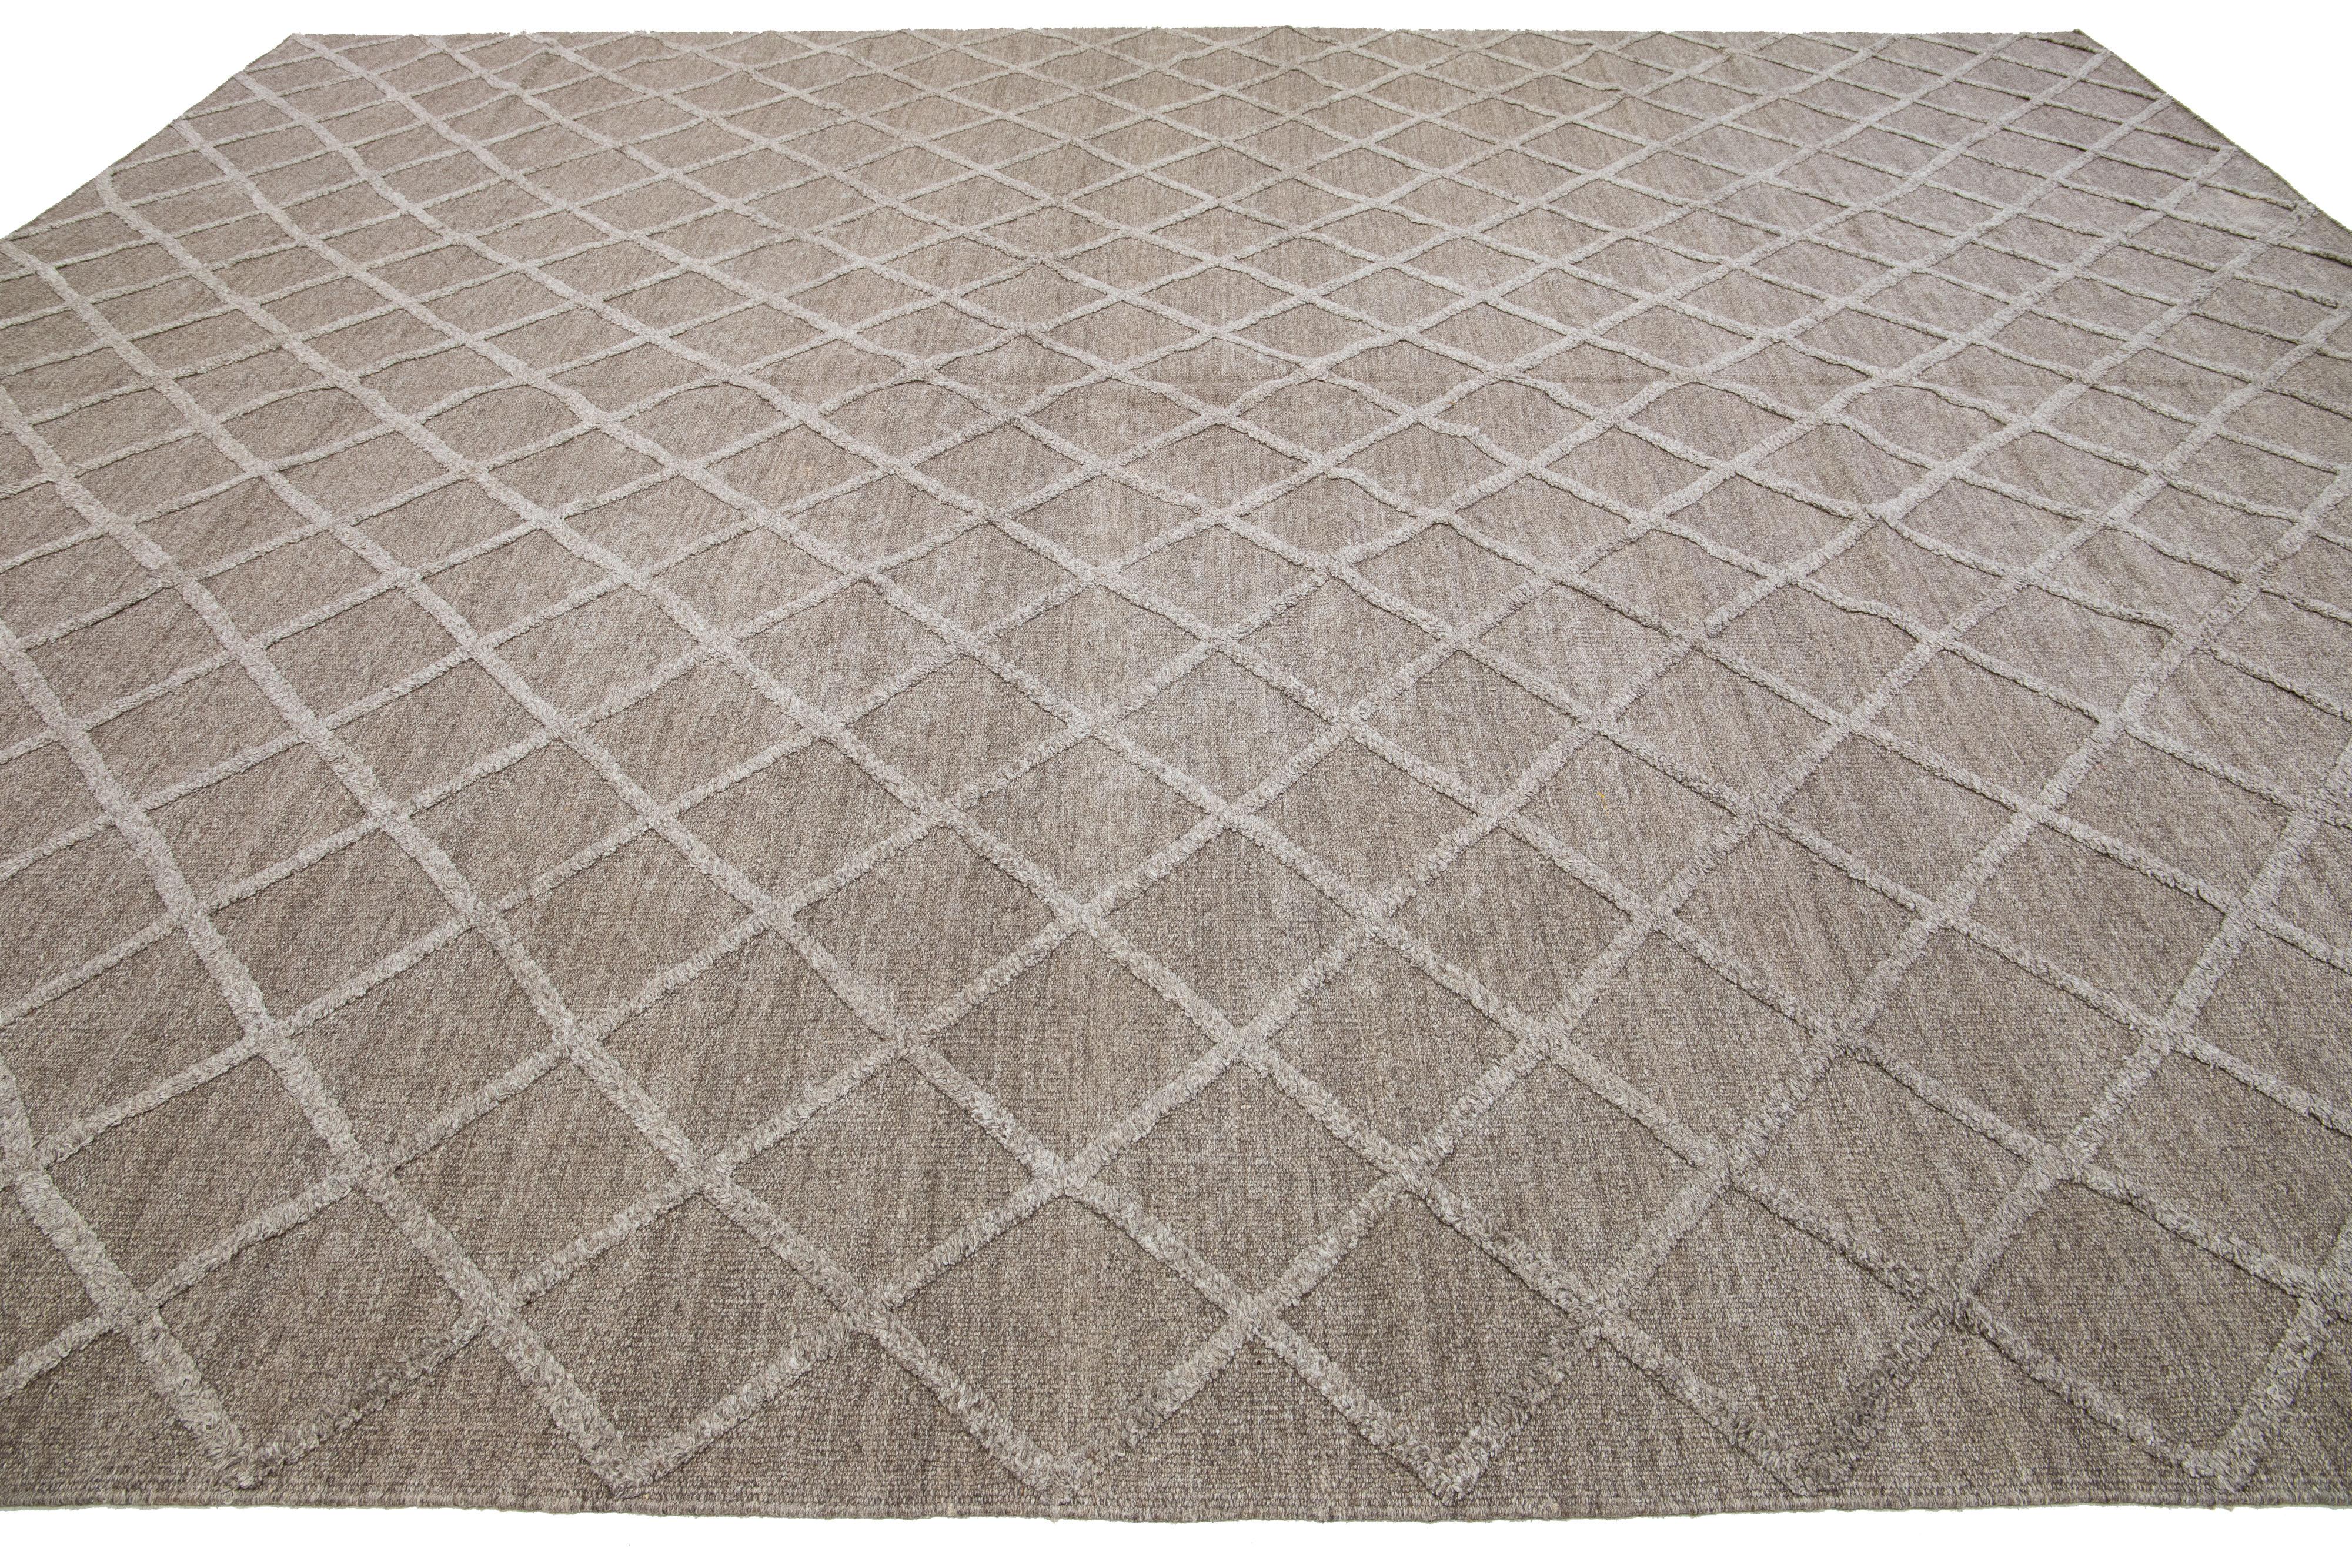 High-Low Contemporary Flaweave Kilim Wool Rug With Trellis Design In Brown In New Condition For Sale In Norwalk, CT